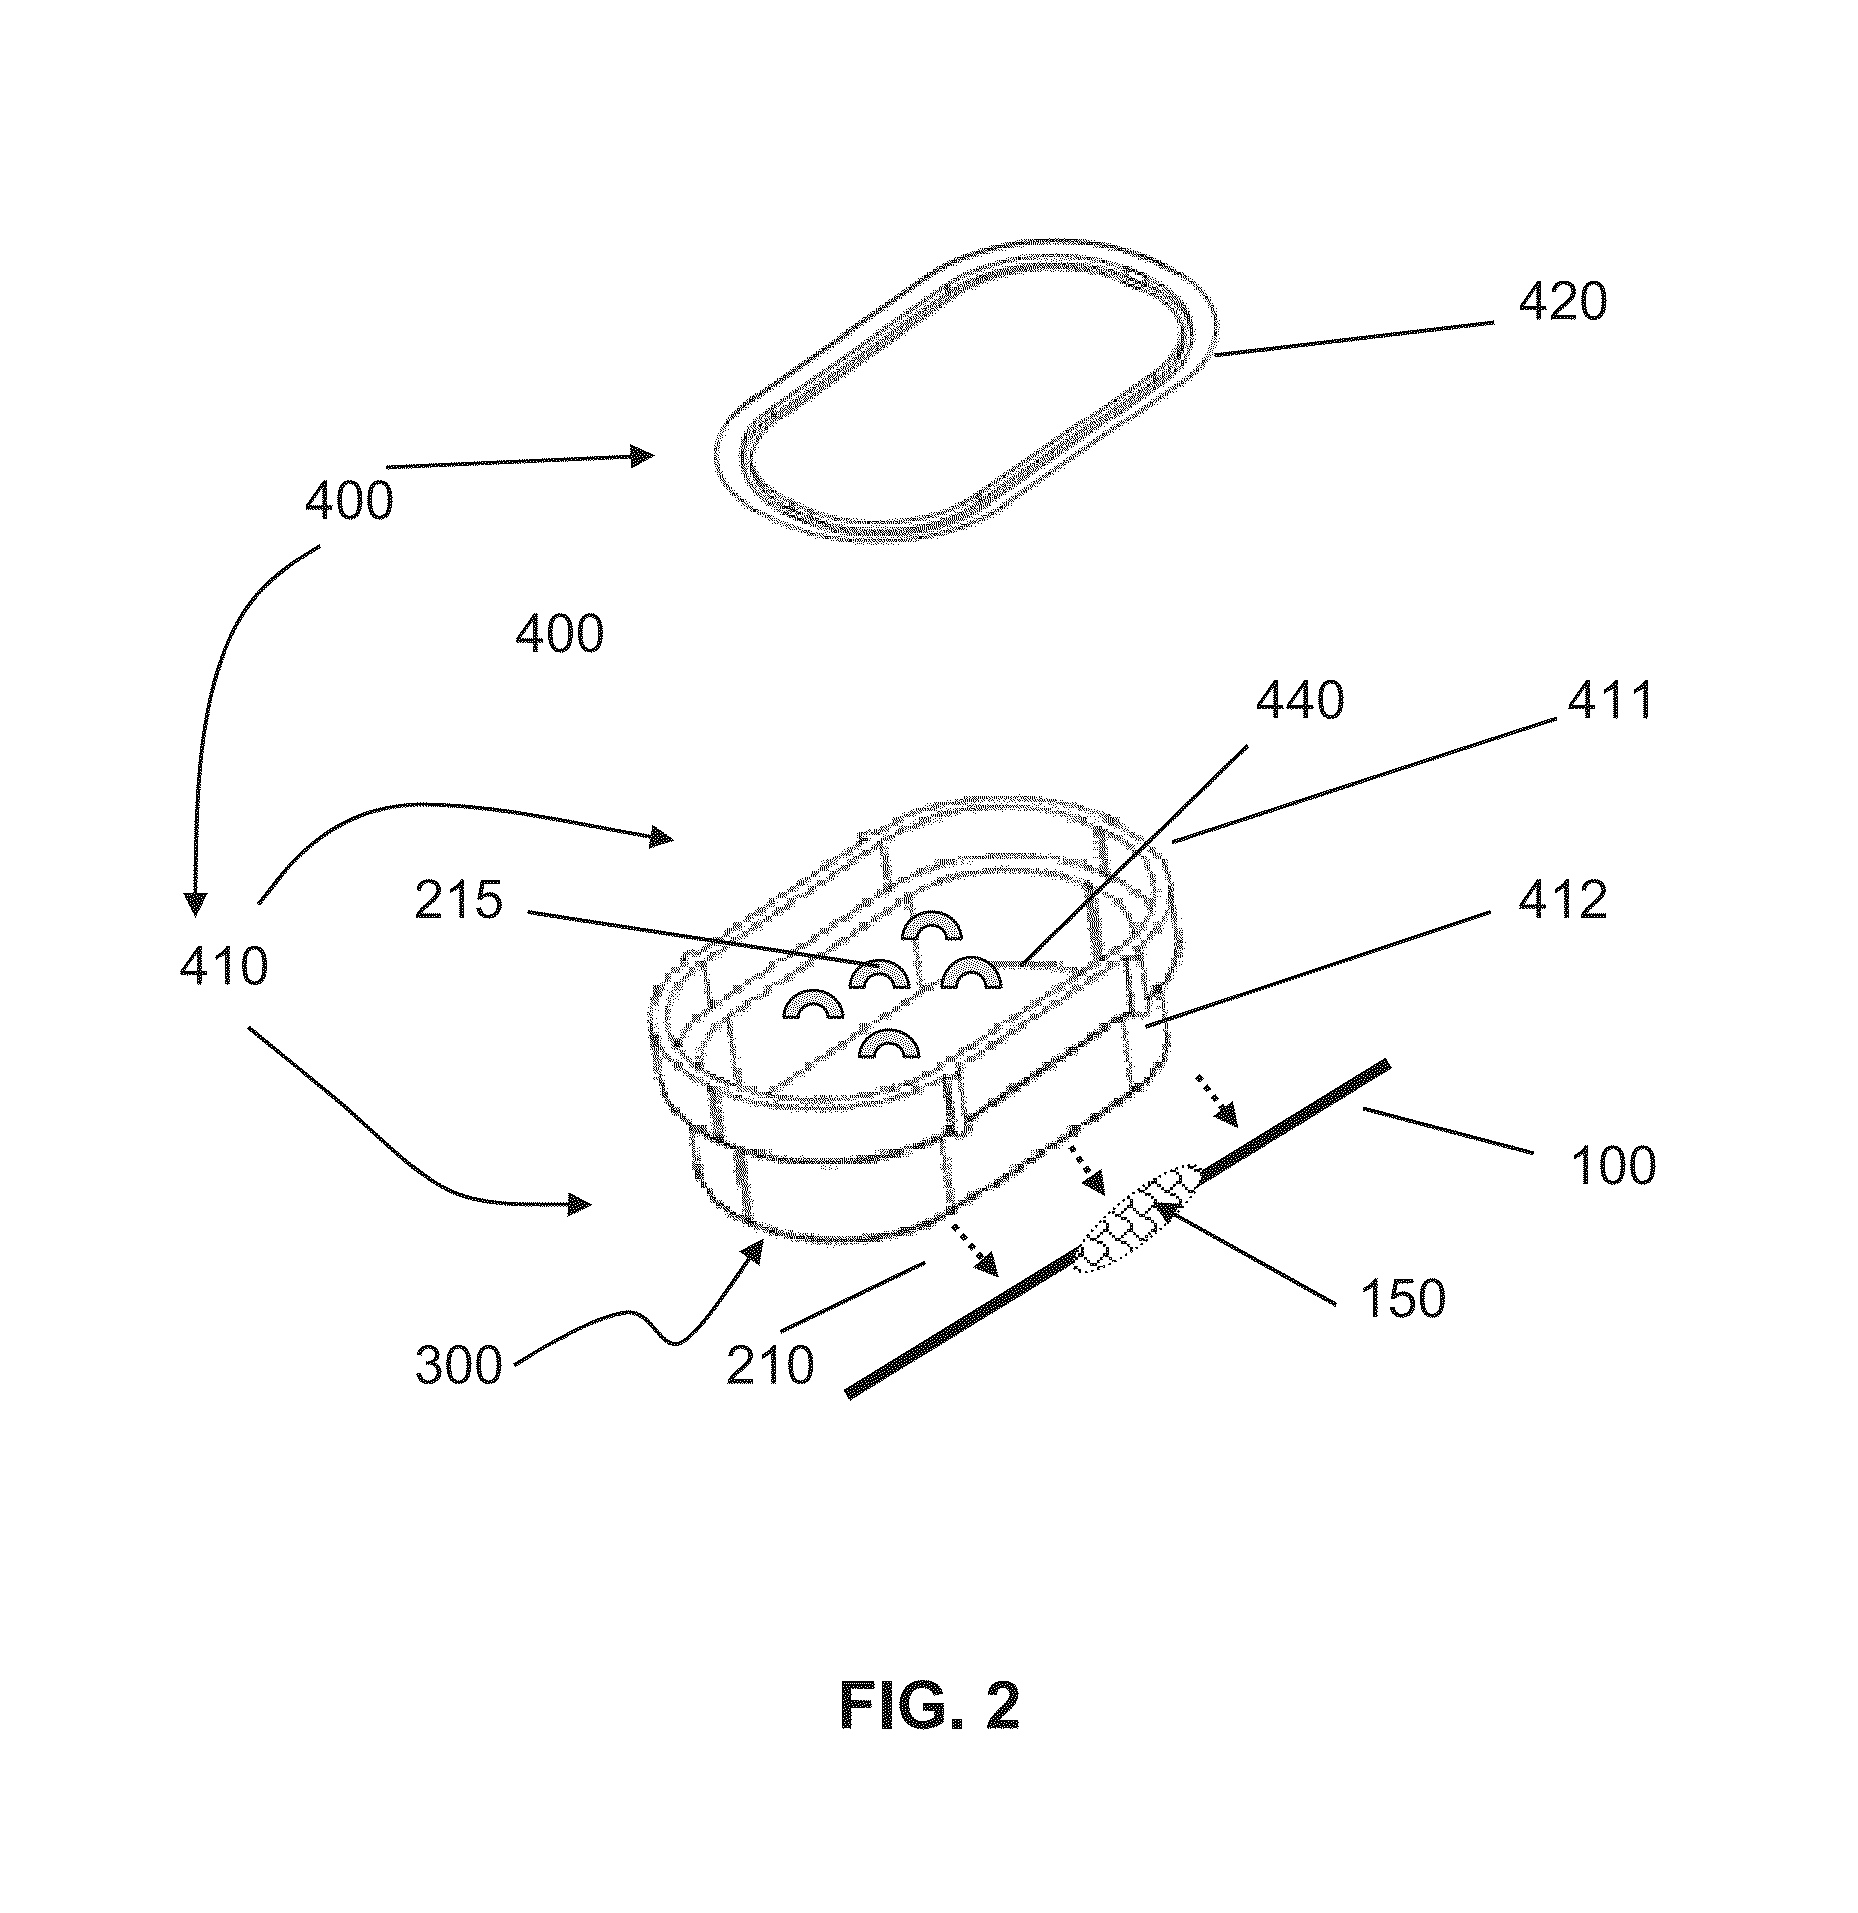 Topical wound healing device for dynamic elastic injury site